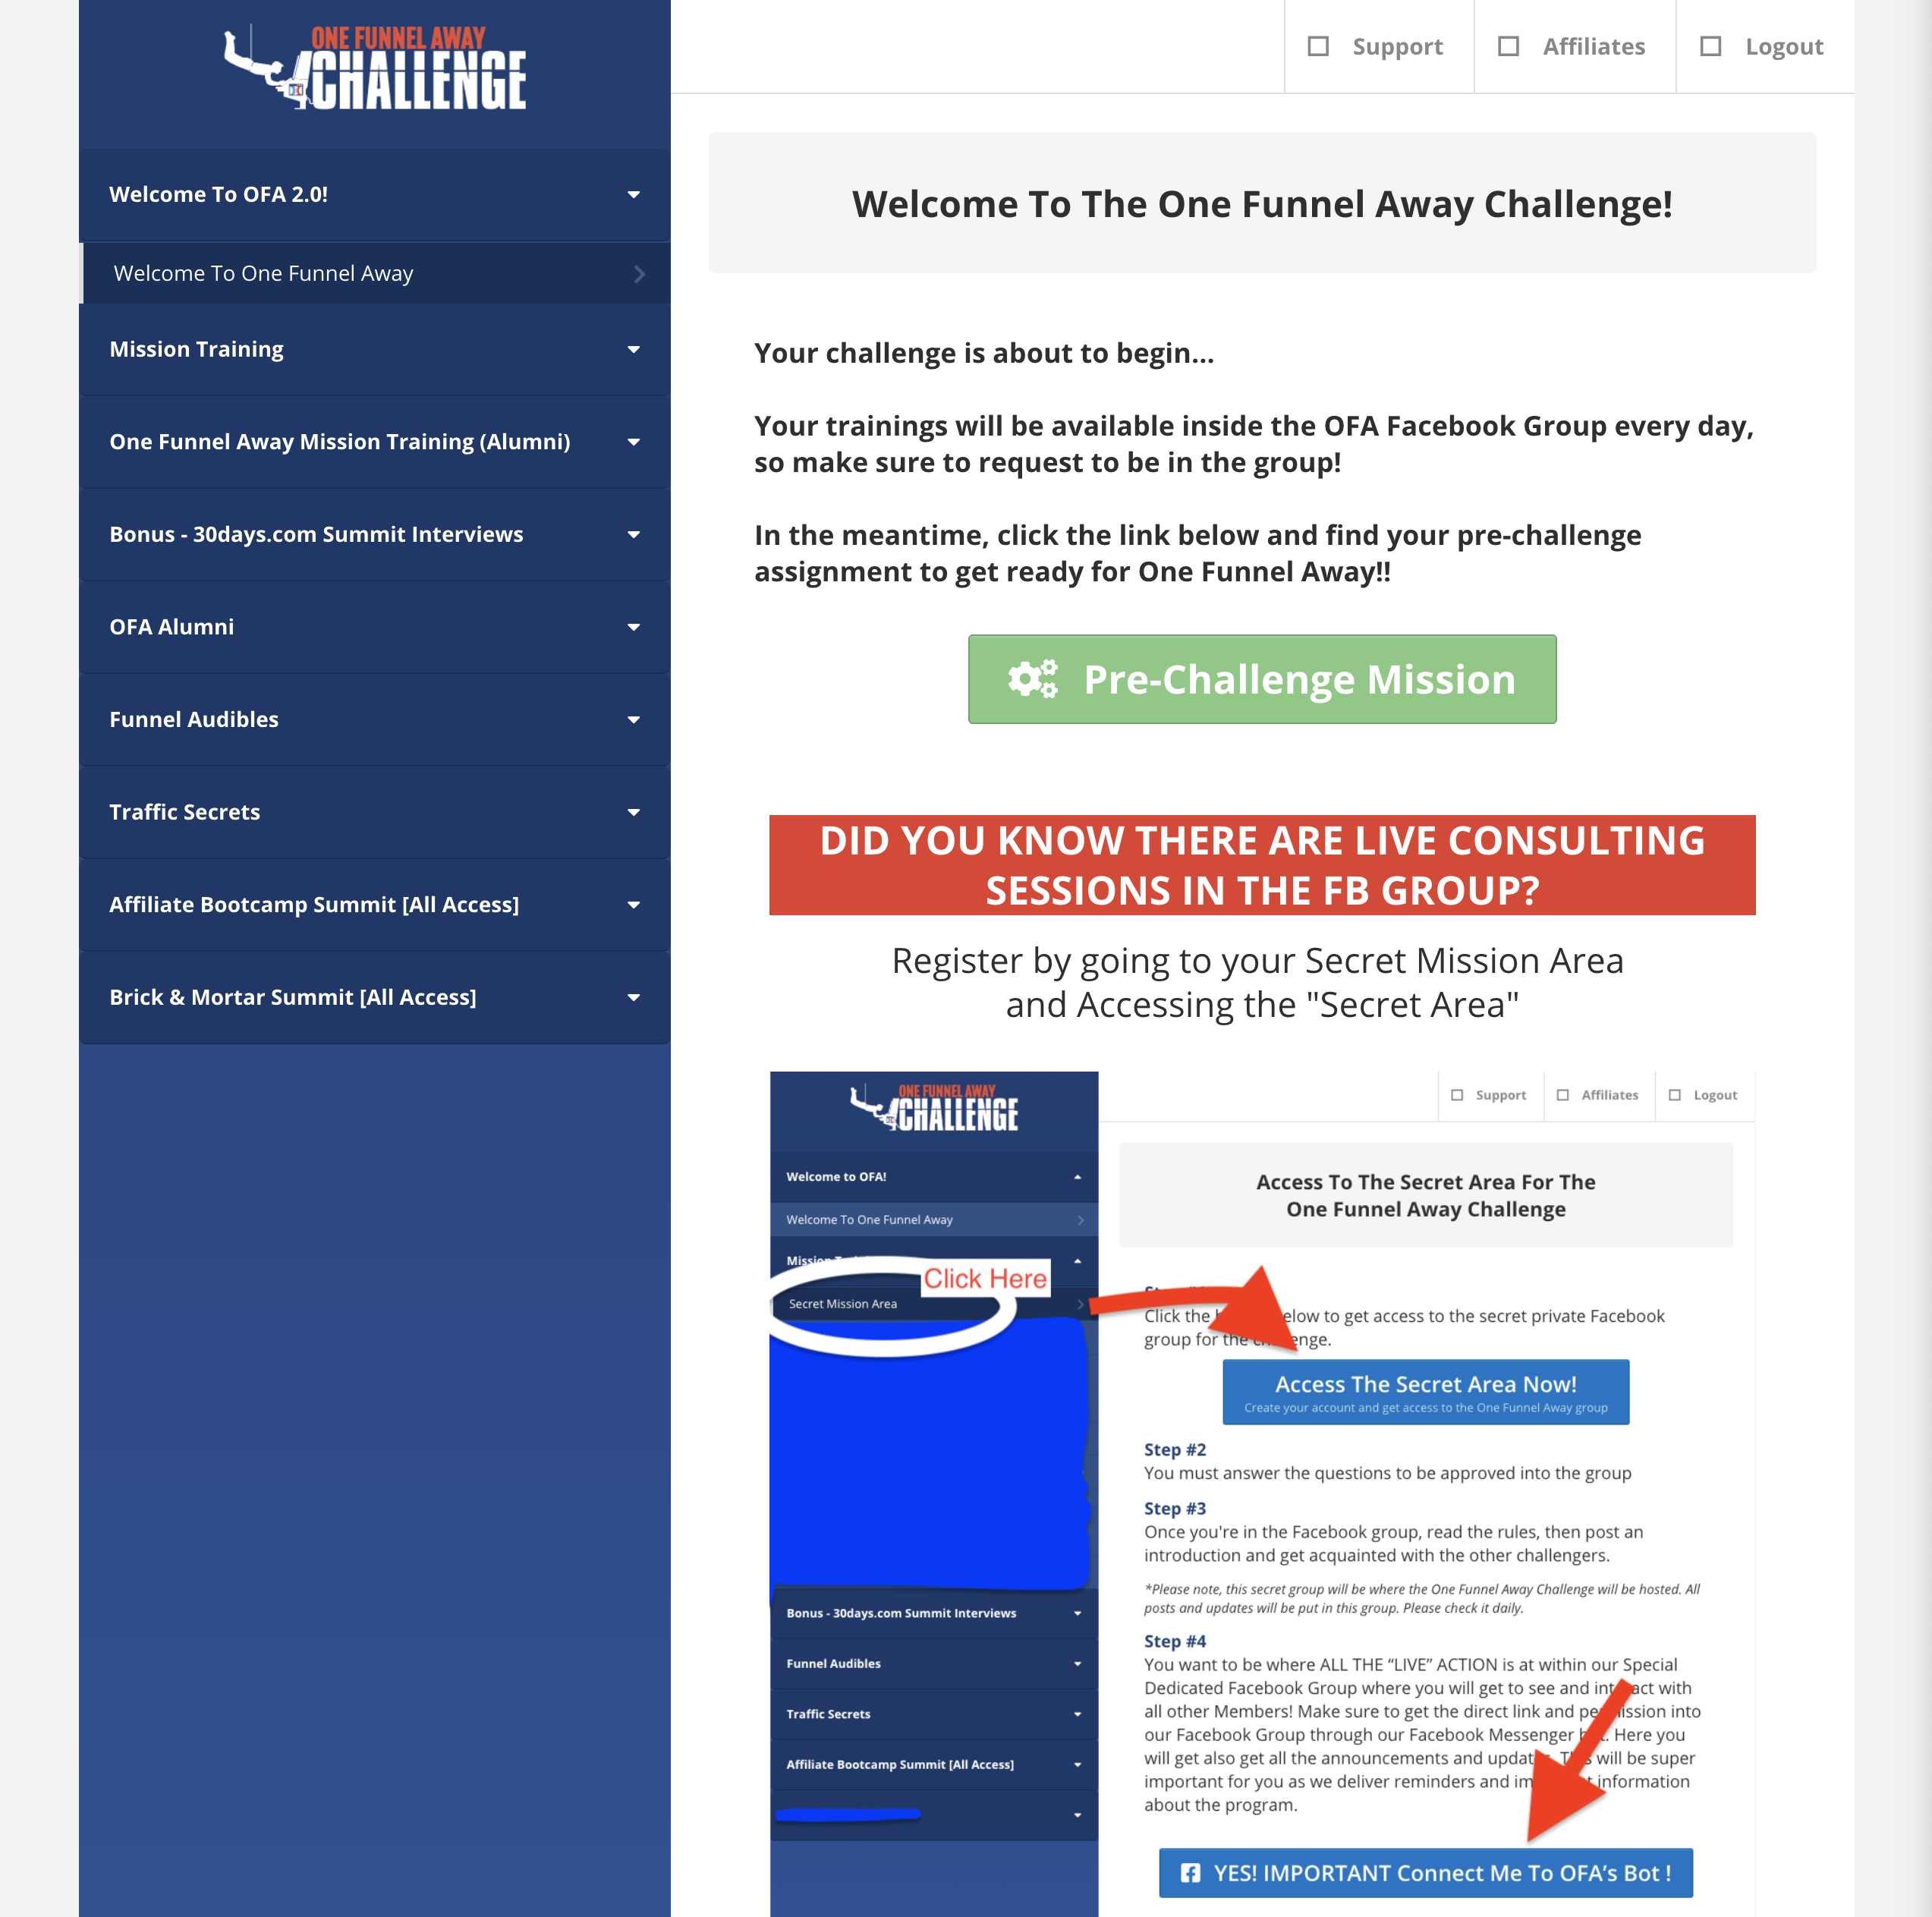 ClickFunnels Membership Sites: Your Questions Answered